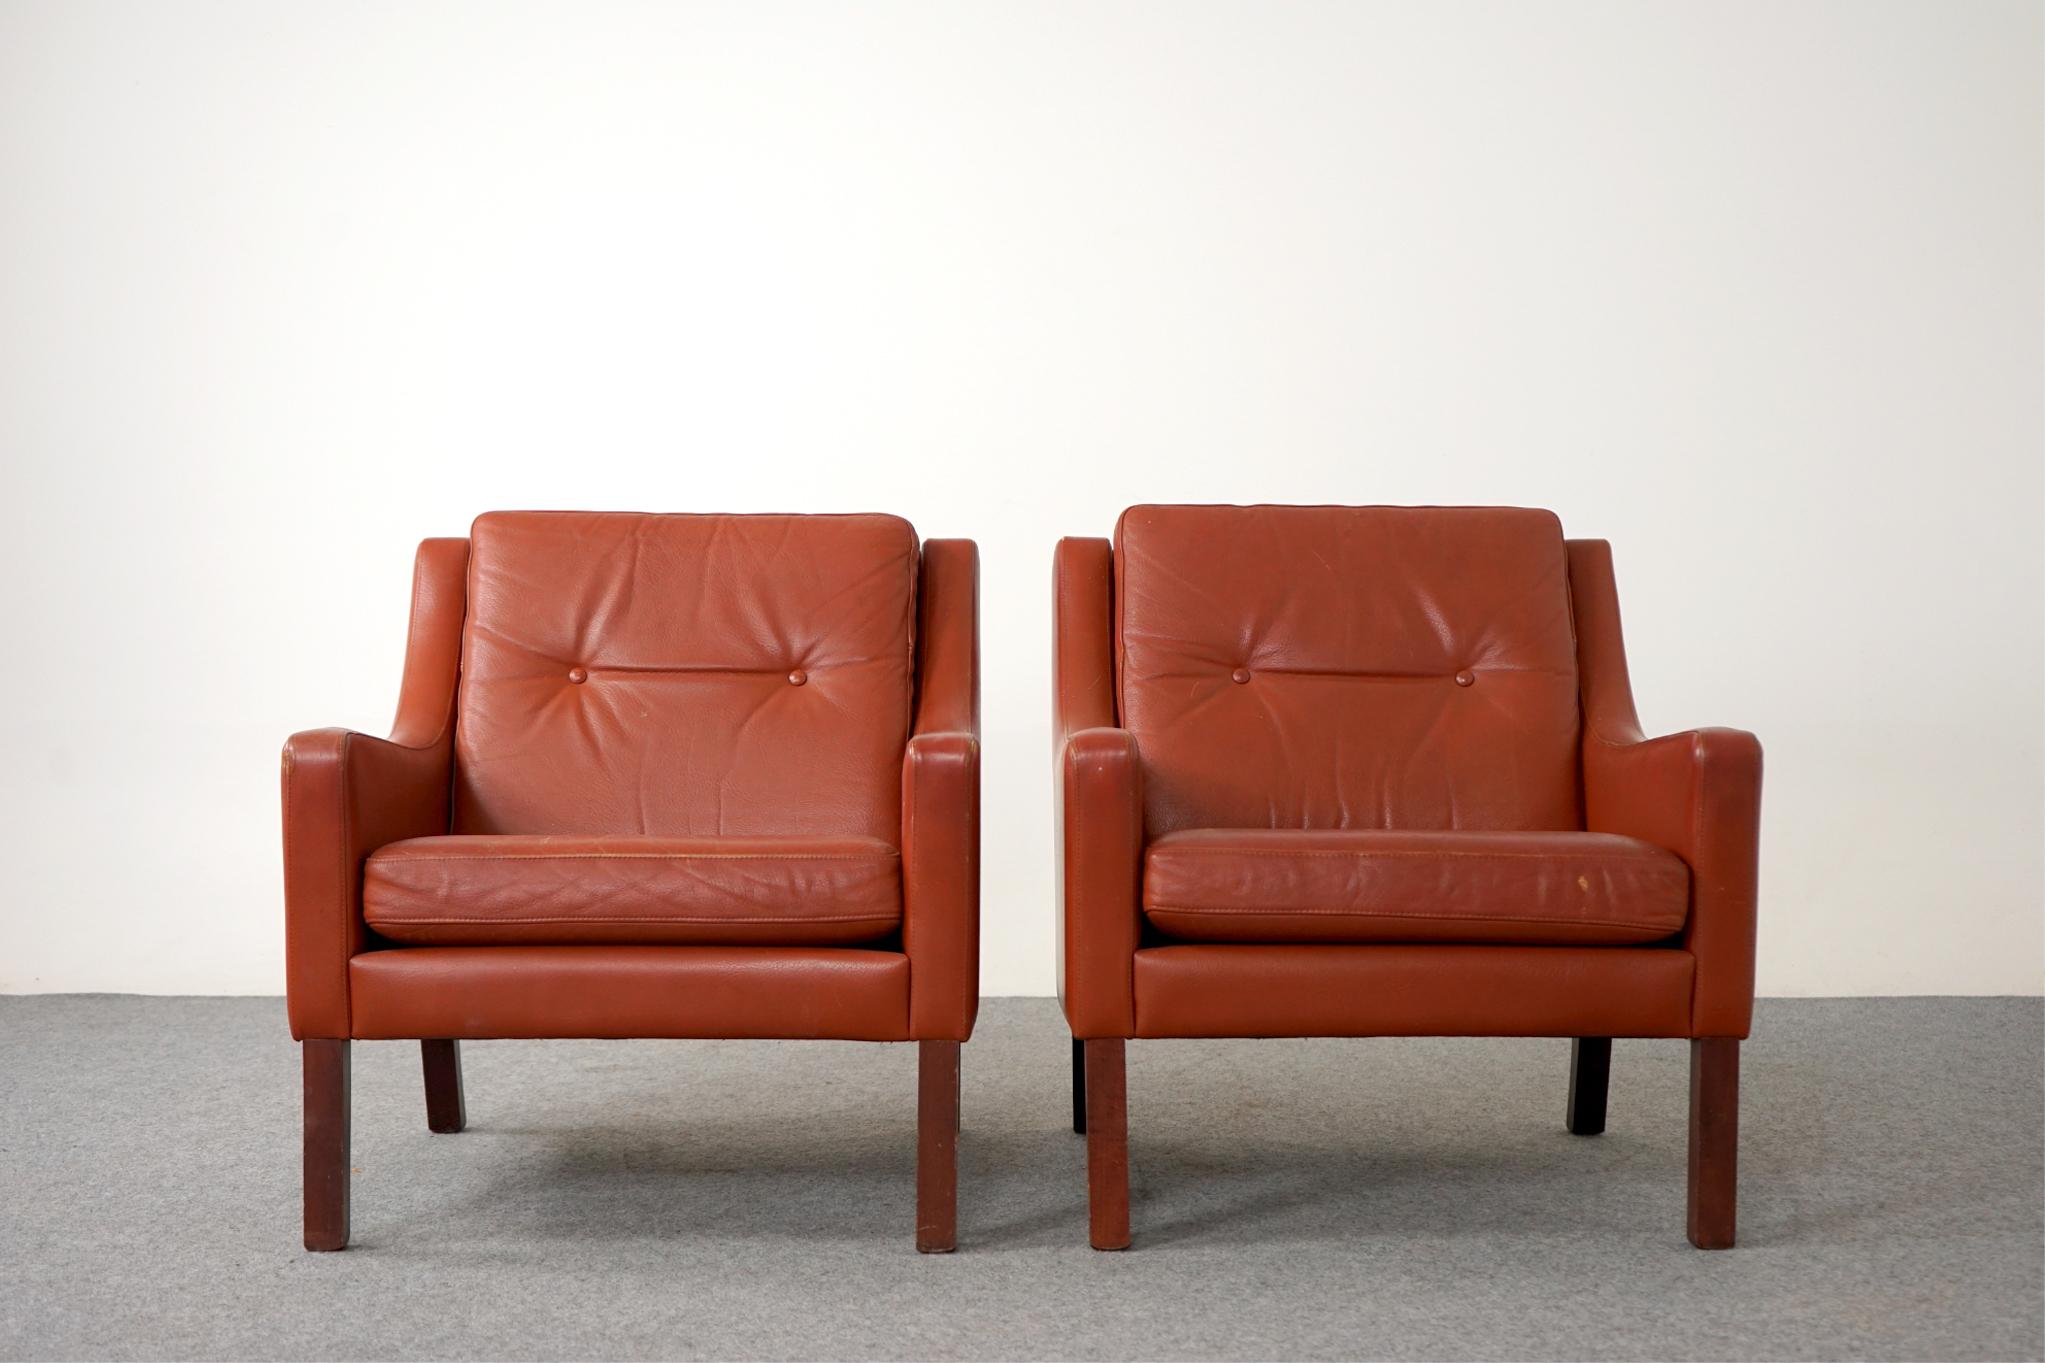 Pair of Danish Mid-Century Modern Tufted Leather Loungers In Good Condition For Sale In VANCOUVER, CA